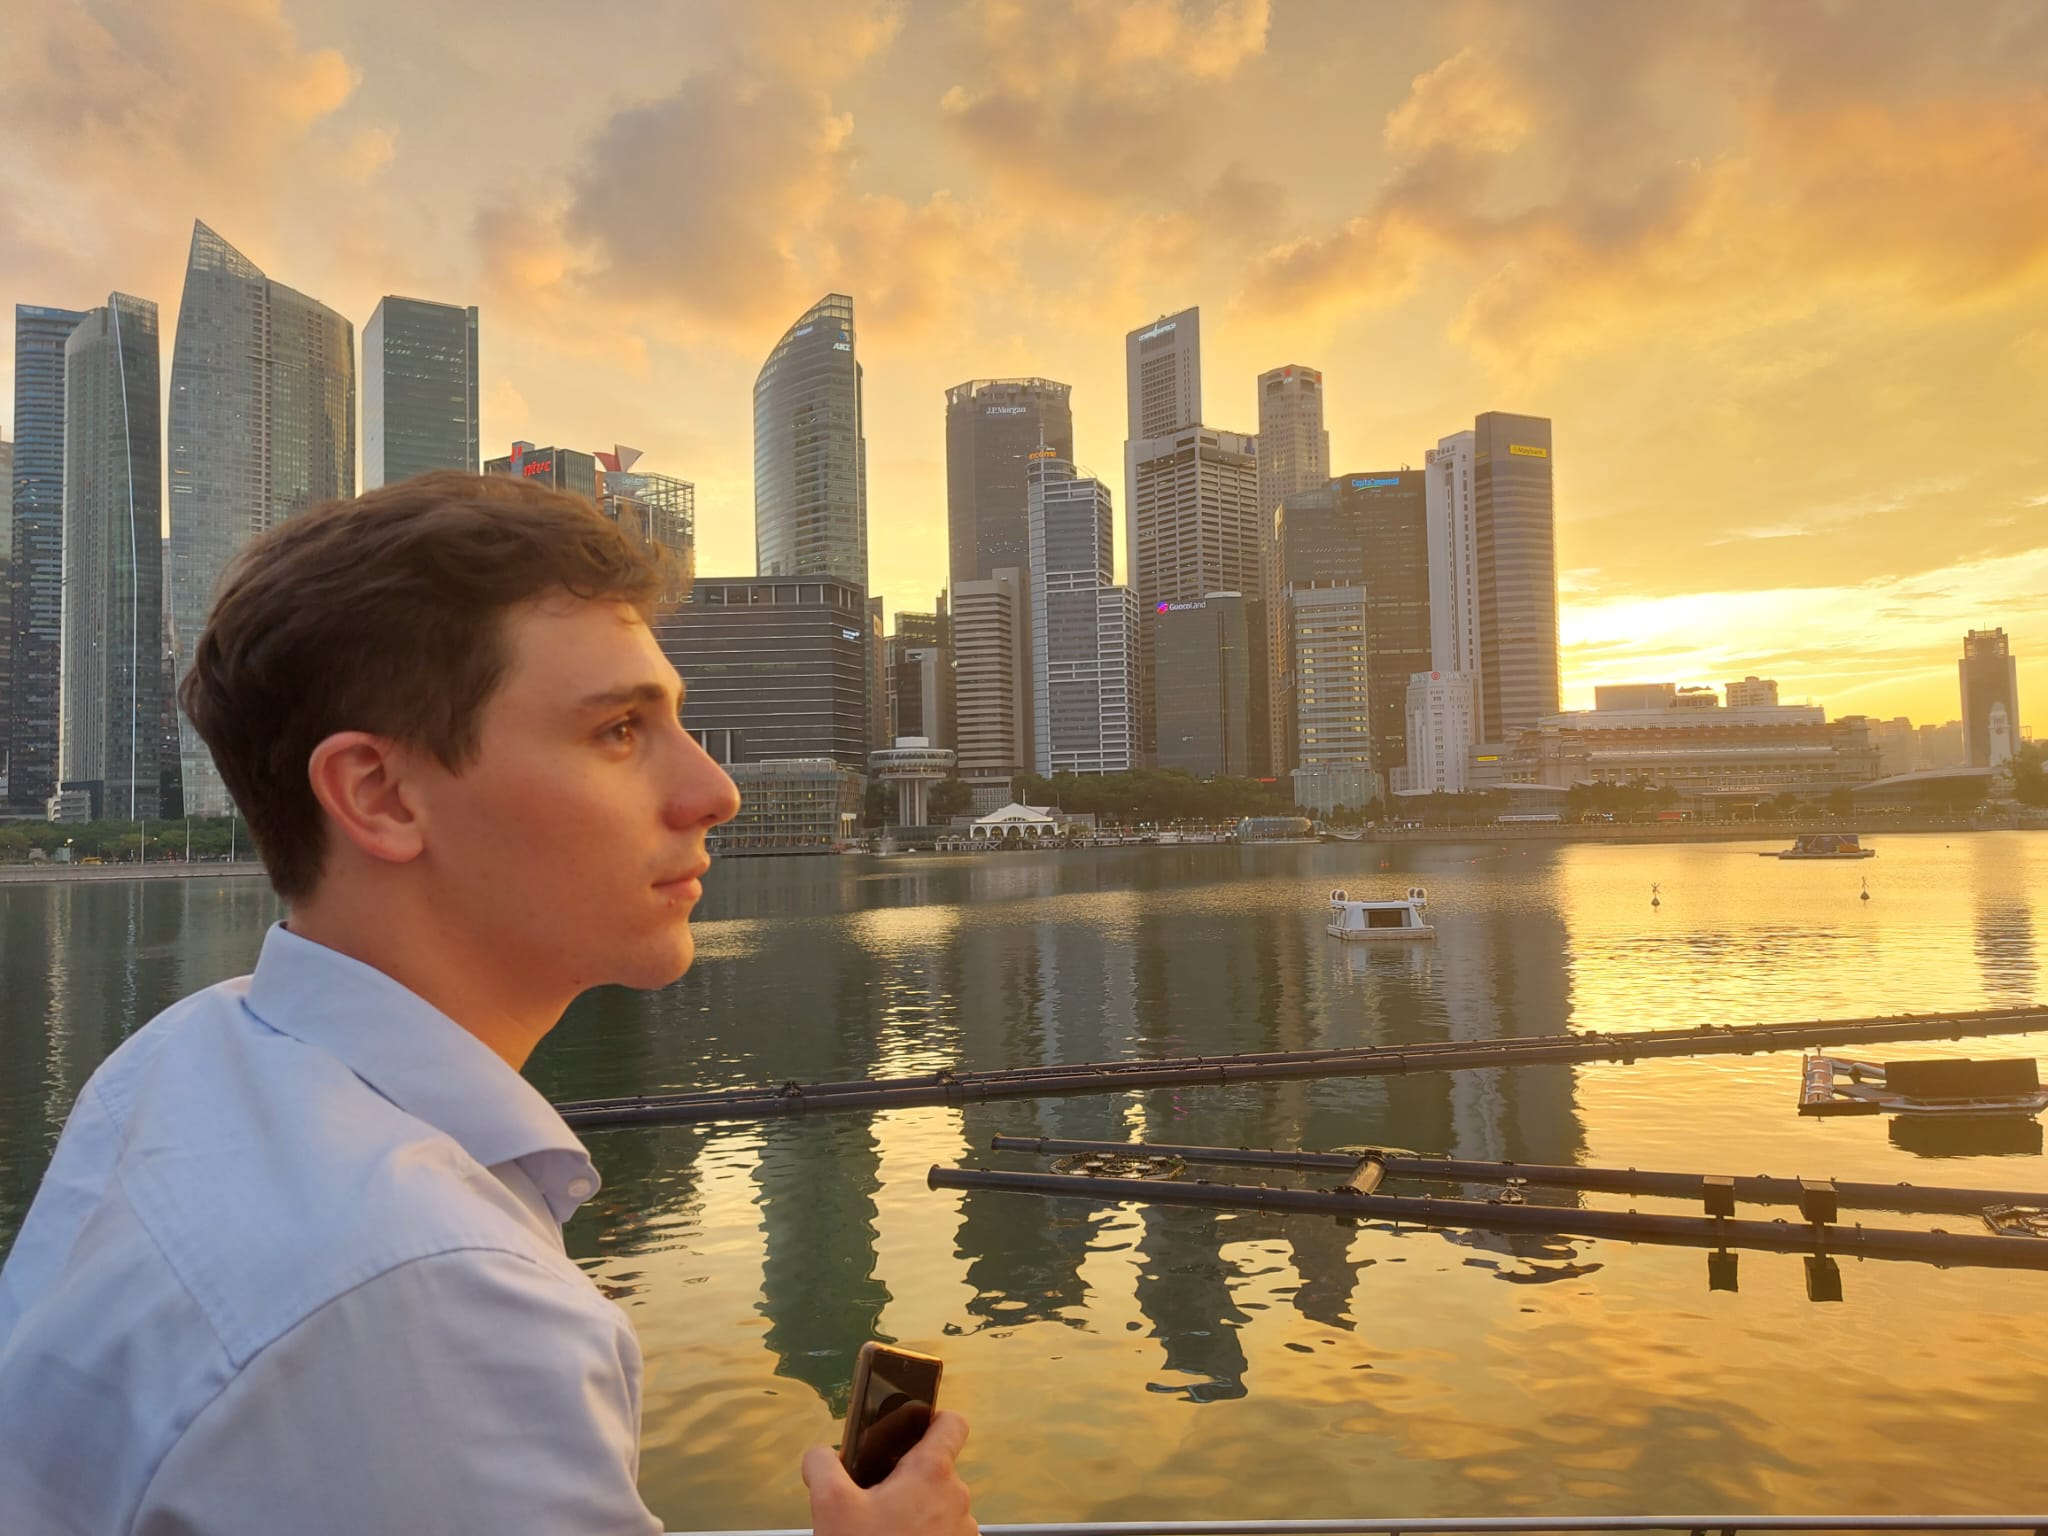 Leonardo Lotto, a young man from Valle d’Aosta in his Master’s degree in International Management in Singapore